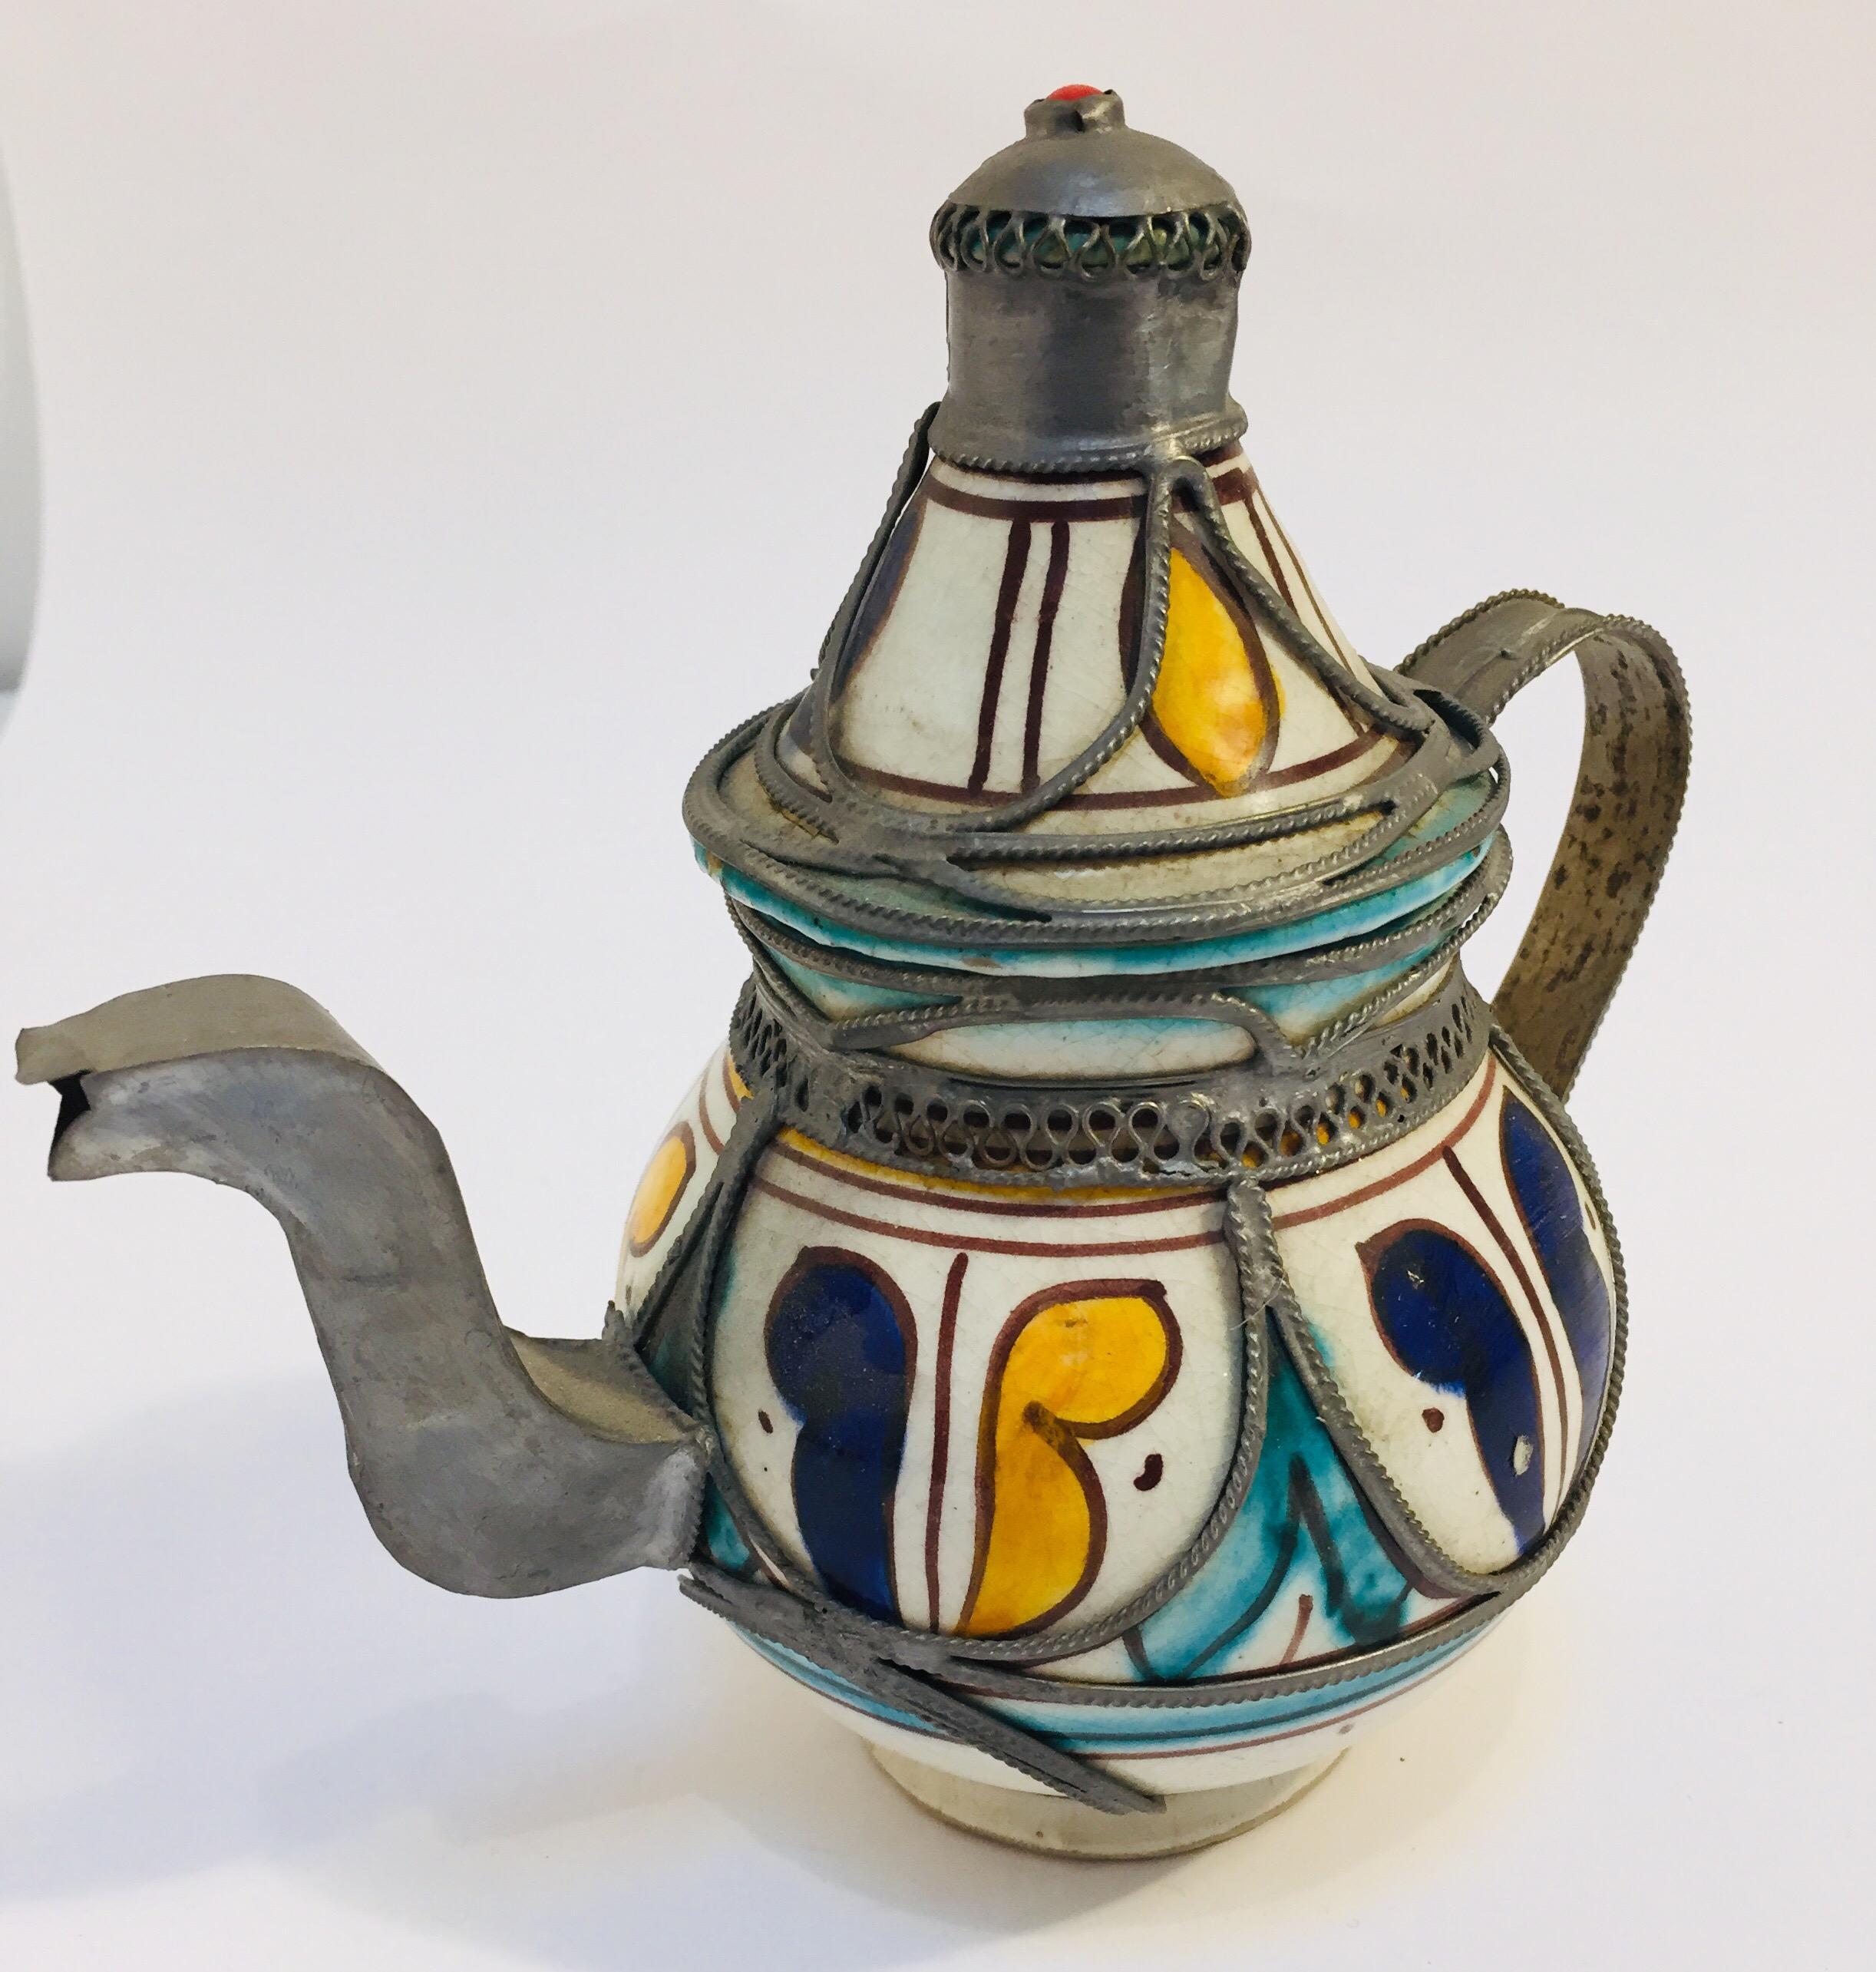 Traditional vintage ceramic and silver metal filigree Moroccan tea pot.
Decorative tea pot with traditional hand painted design in yellow, white and blue, handcrafted in Fez, stamped in bottom.
Great decorative Moroccan ceramic art object.
Will